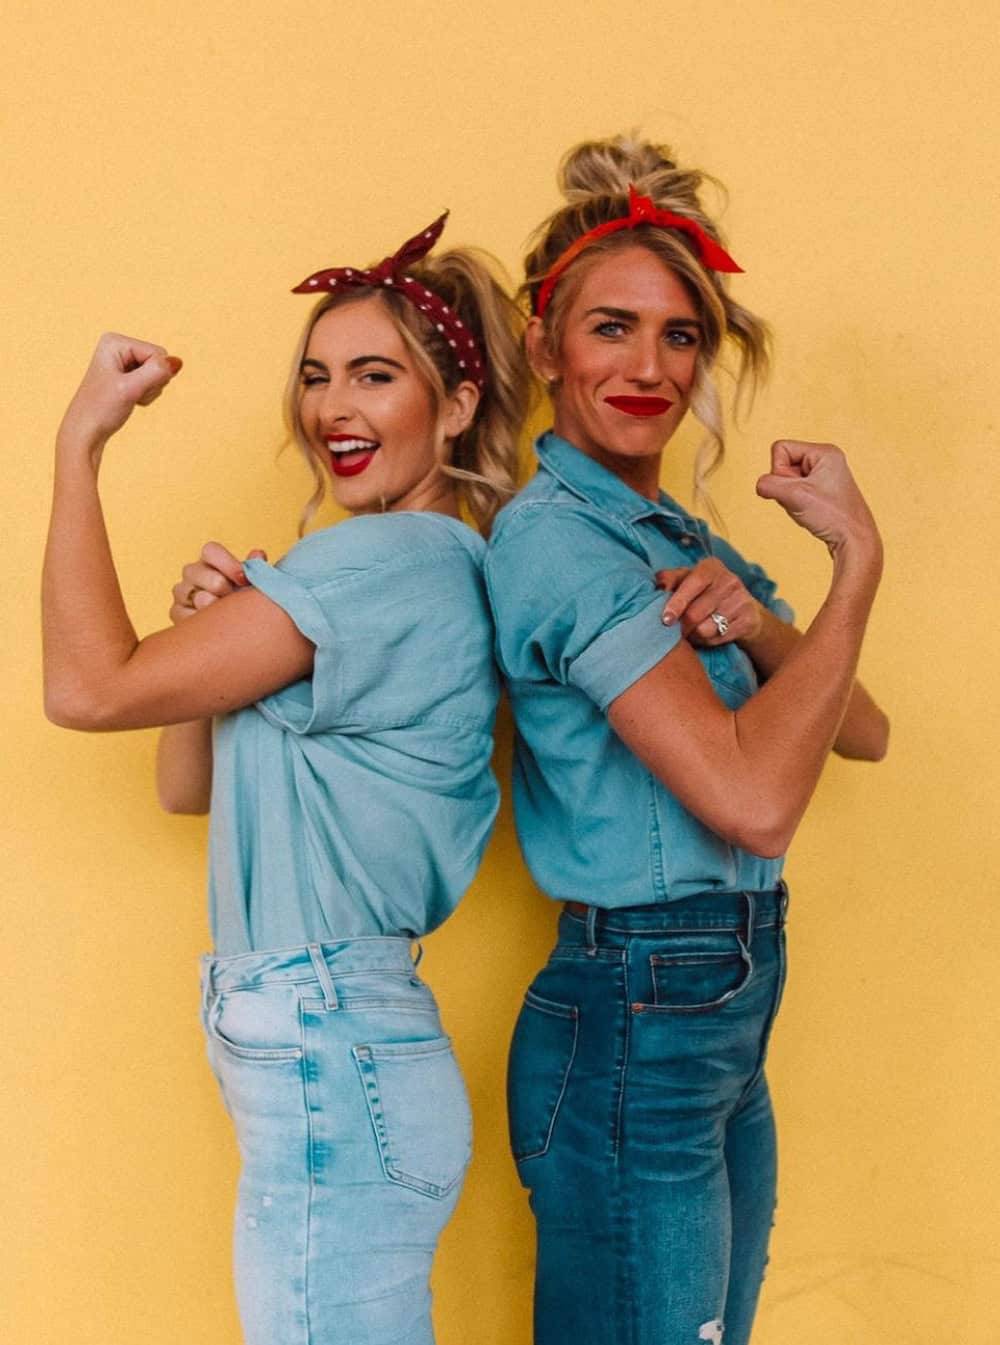 Two women dressed up as Rosie the Riveter for Halloween.